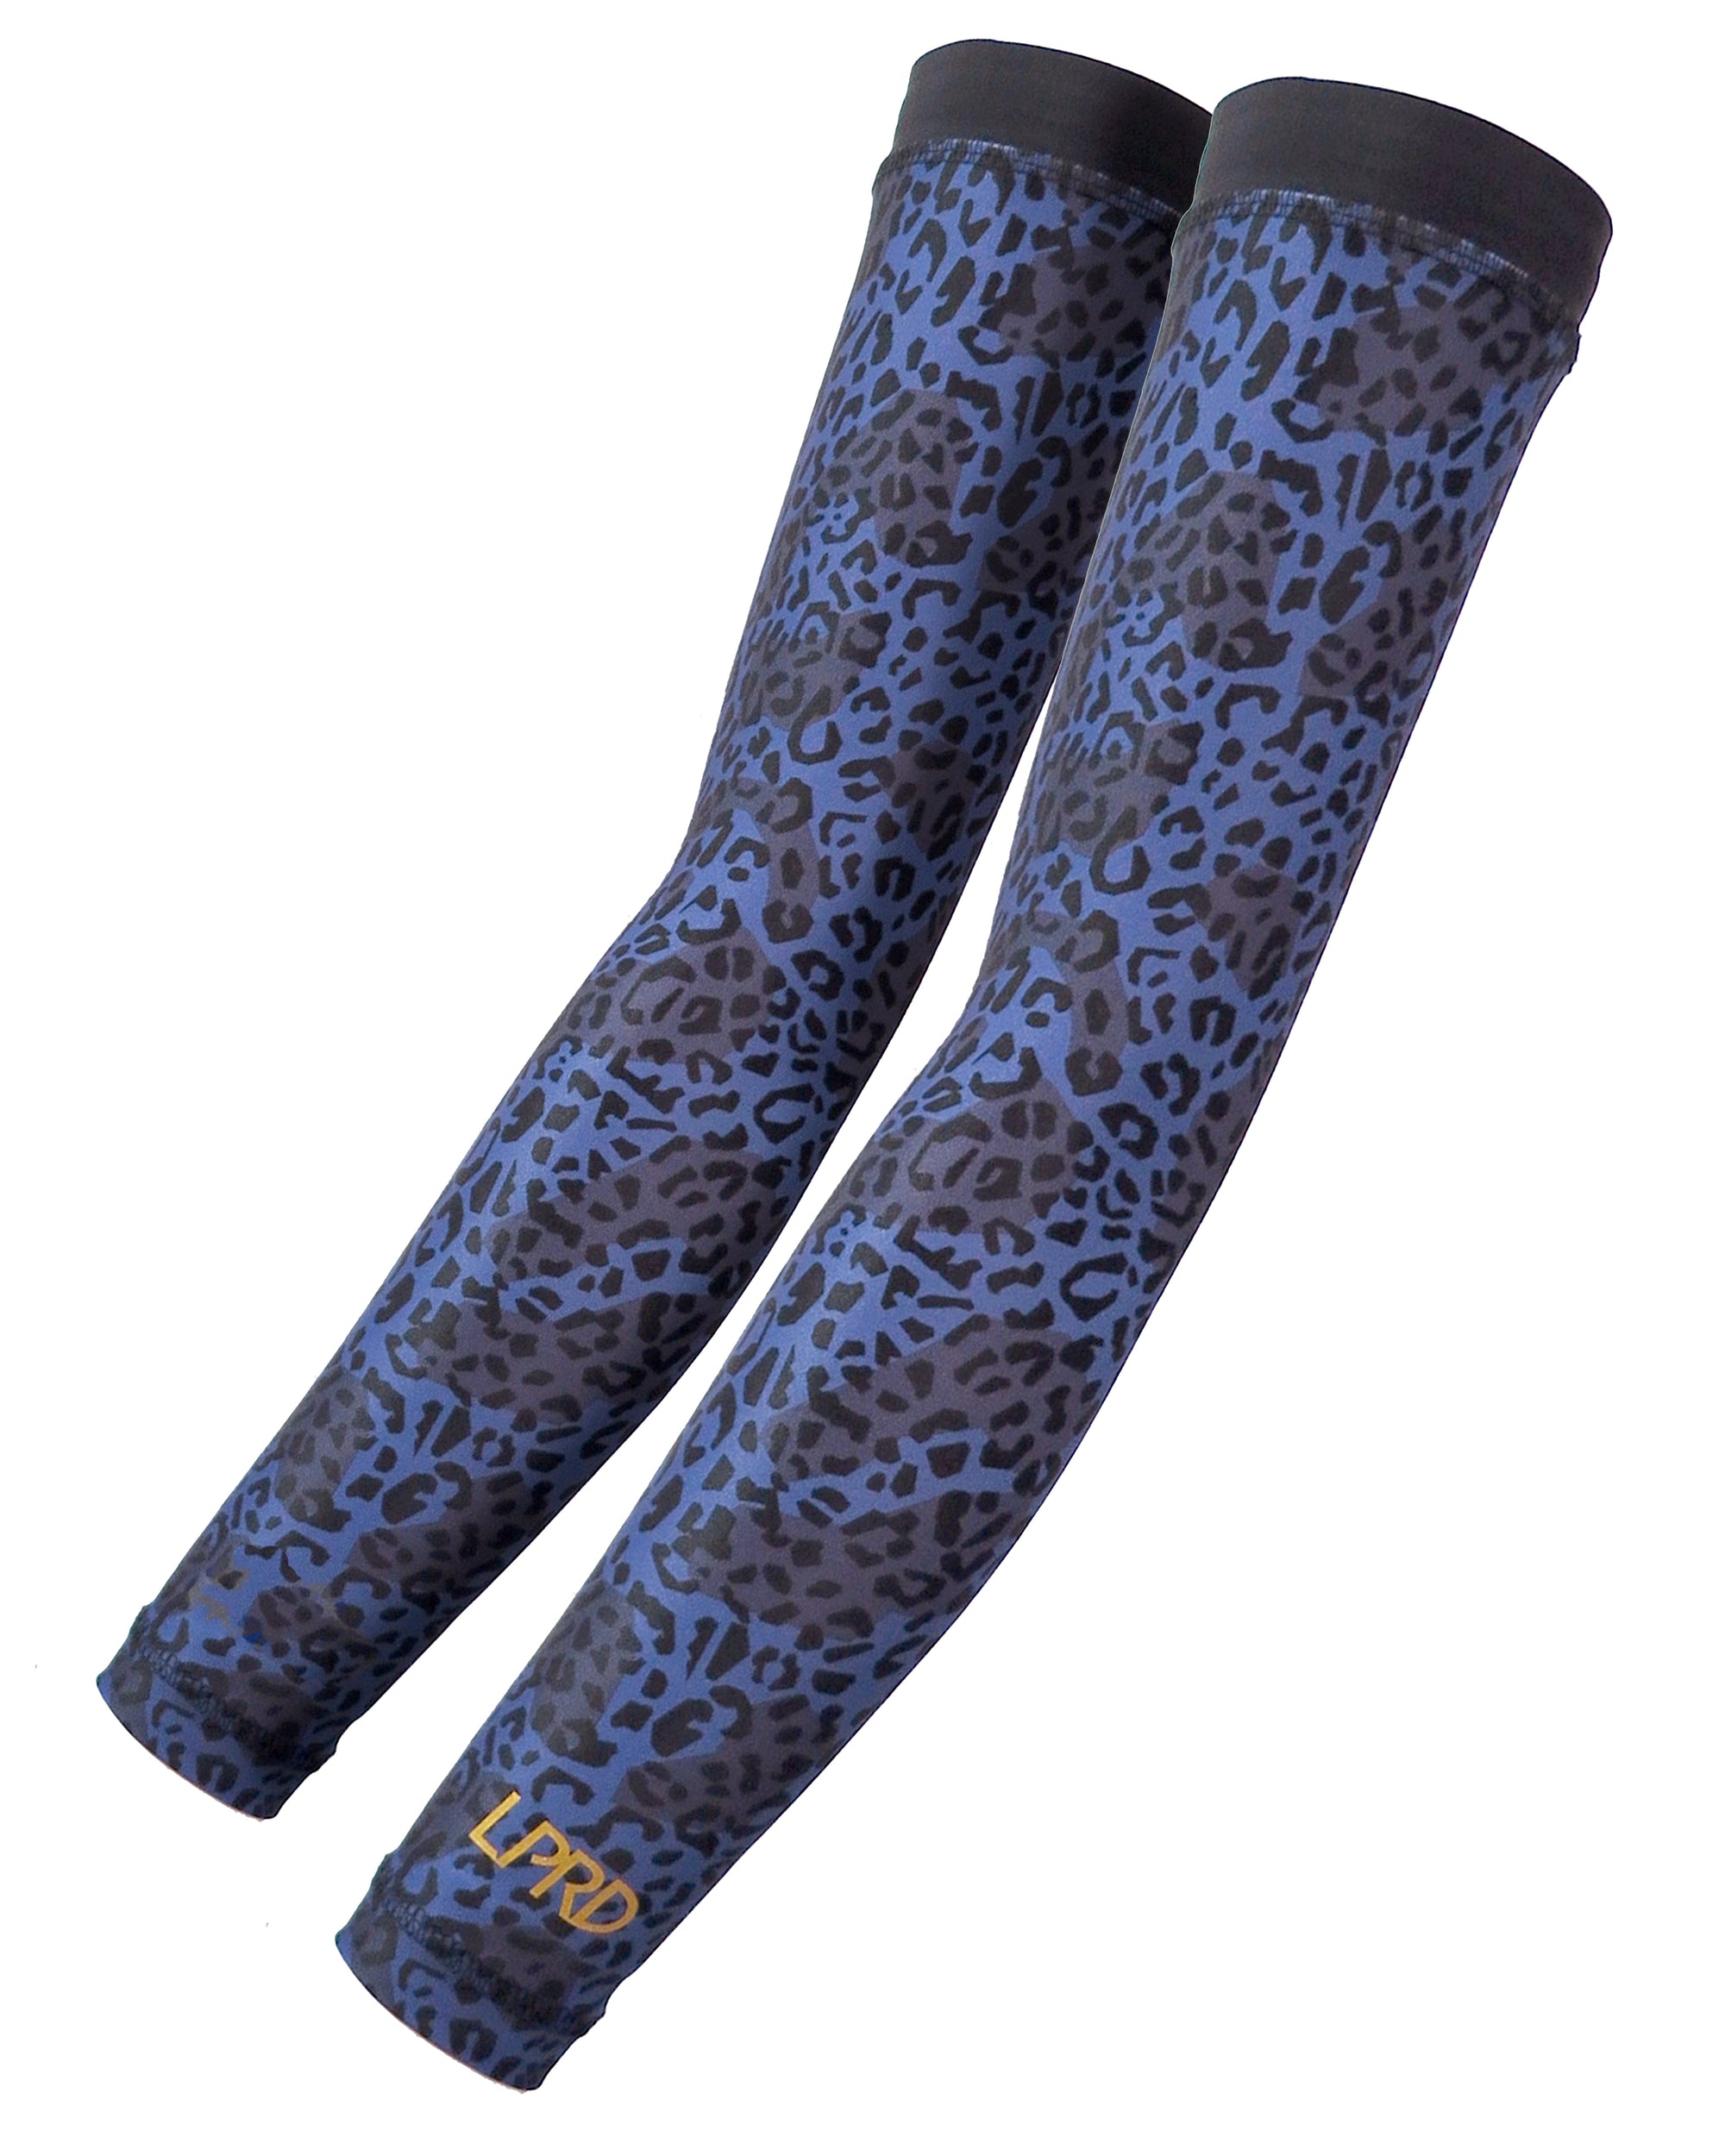 Arm Warmers for cycling in Midnight Leopard Print